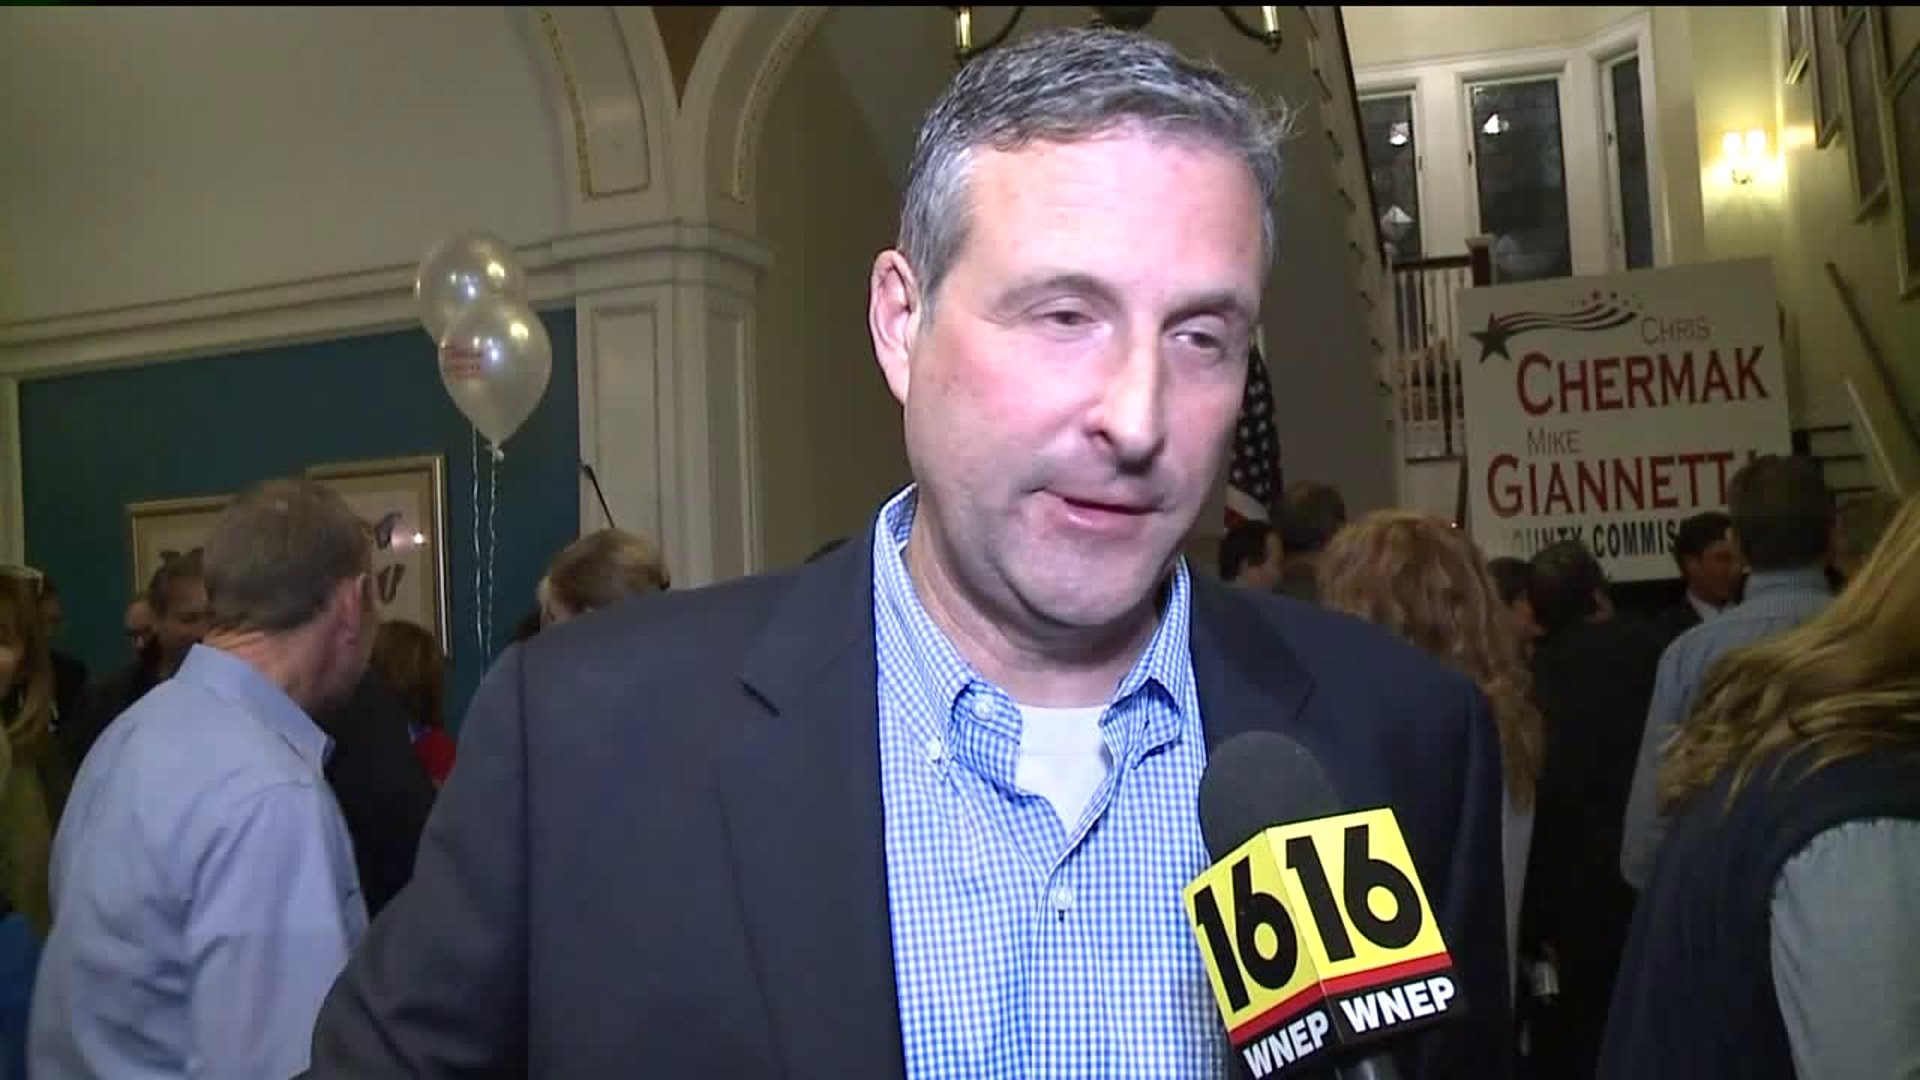 Chermak Wins Minority Commissioner Spot as Third Place Finisher in Lackawanna County